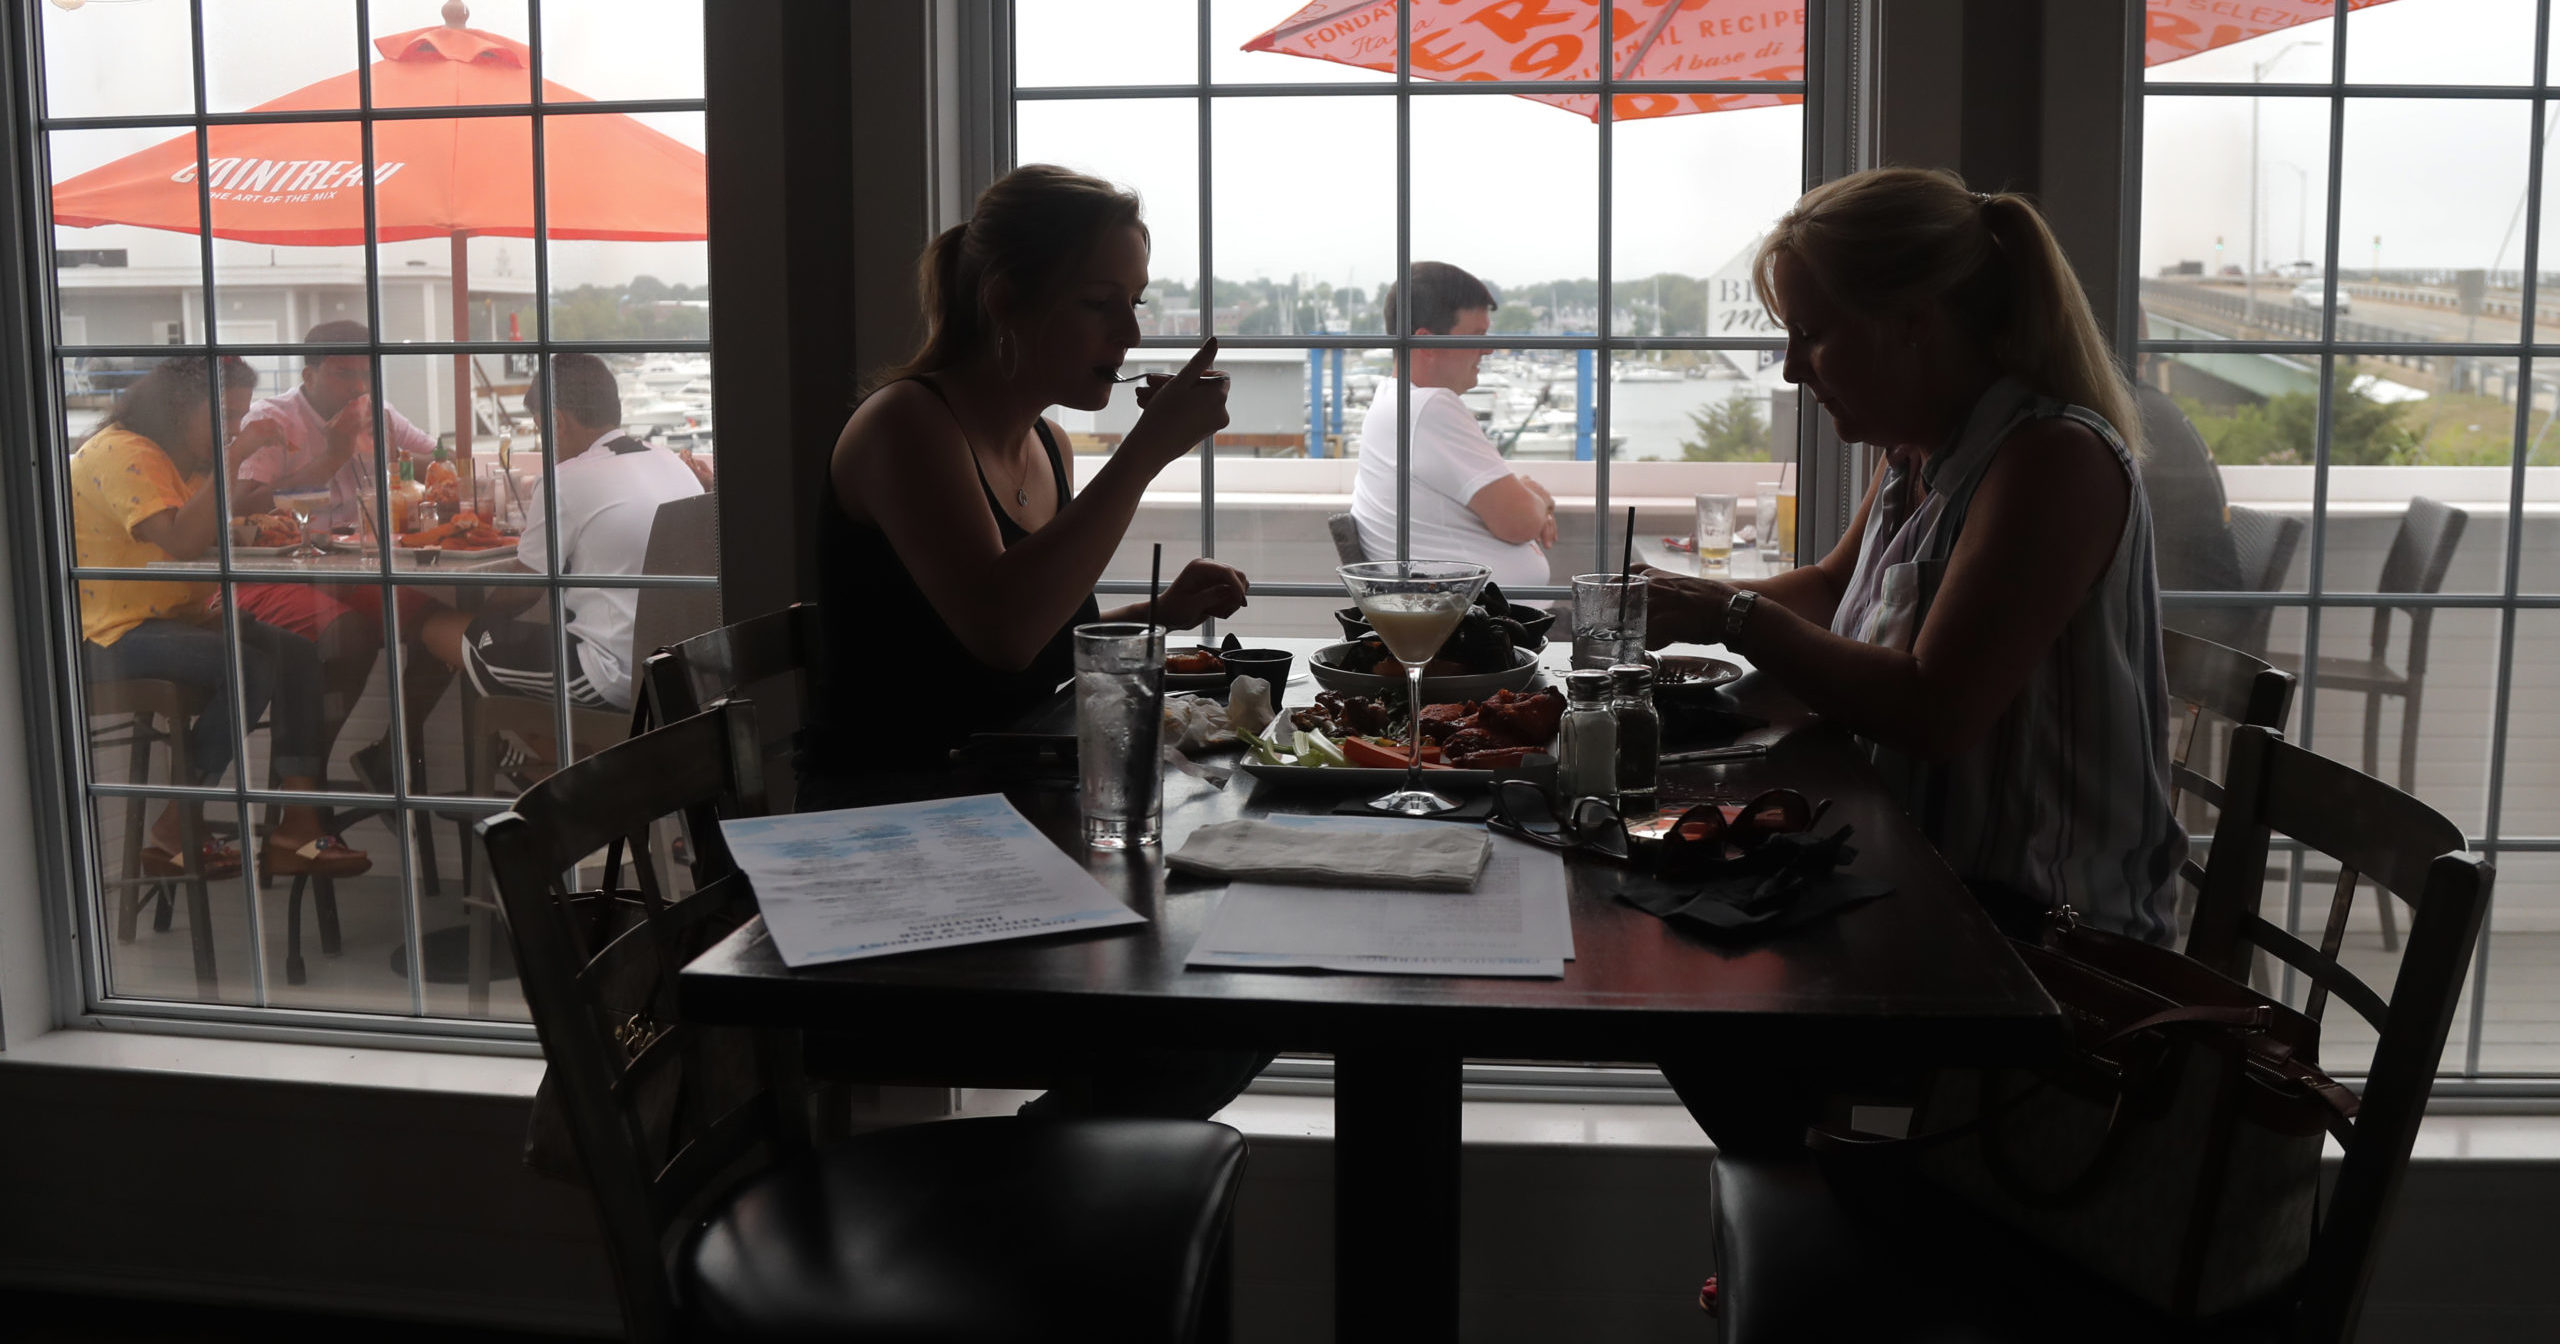 In this June 22, 2020, file photo, two women eat lunch at Portside Restaurant in Salisbury, Massachusetts, after state guidelines allowed for indoor dining. A new poll from The Associated Press-NORC Center for Public Affairs Research shows Americans becoming less concerned about infection and less supportive of restrictions.